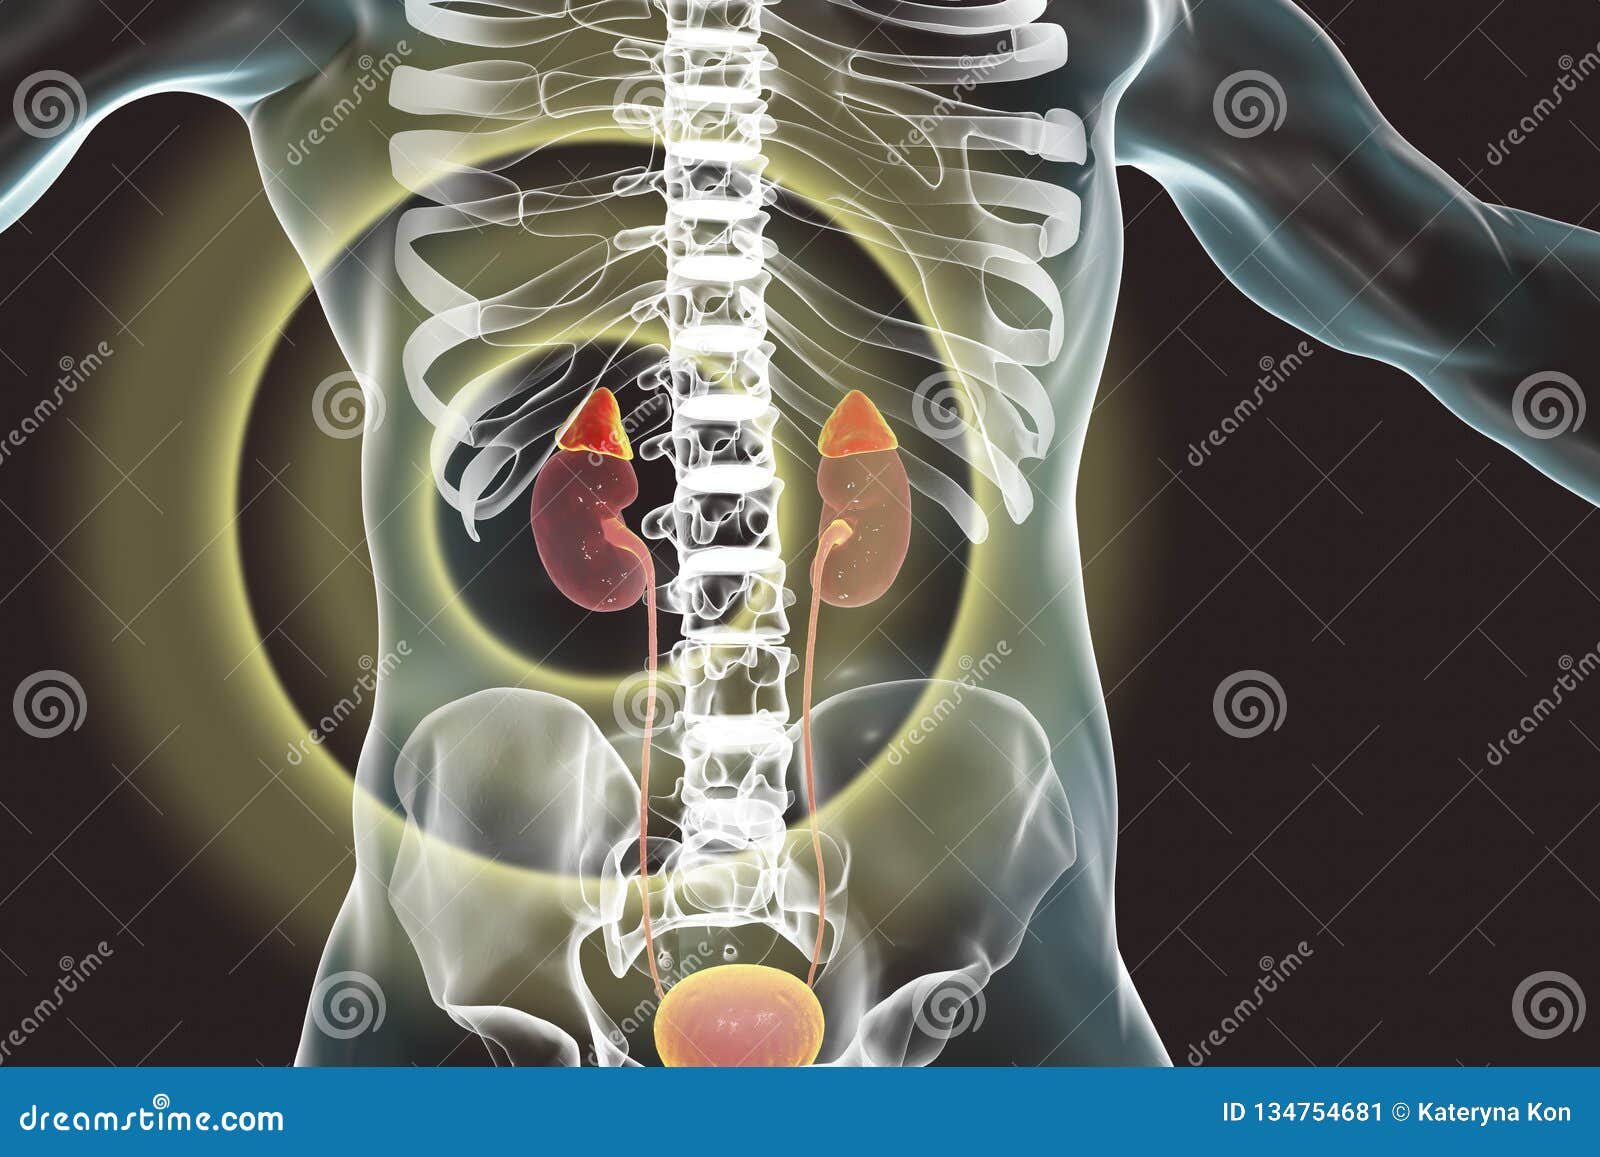 Kidney And Adrenal Glands Highlighted Inside Human Body Stock